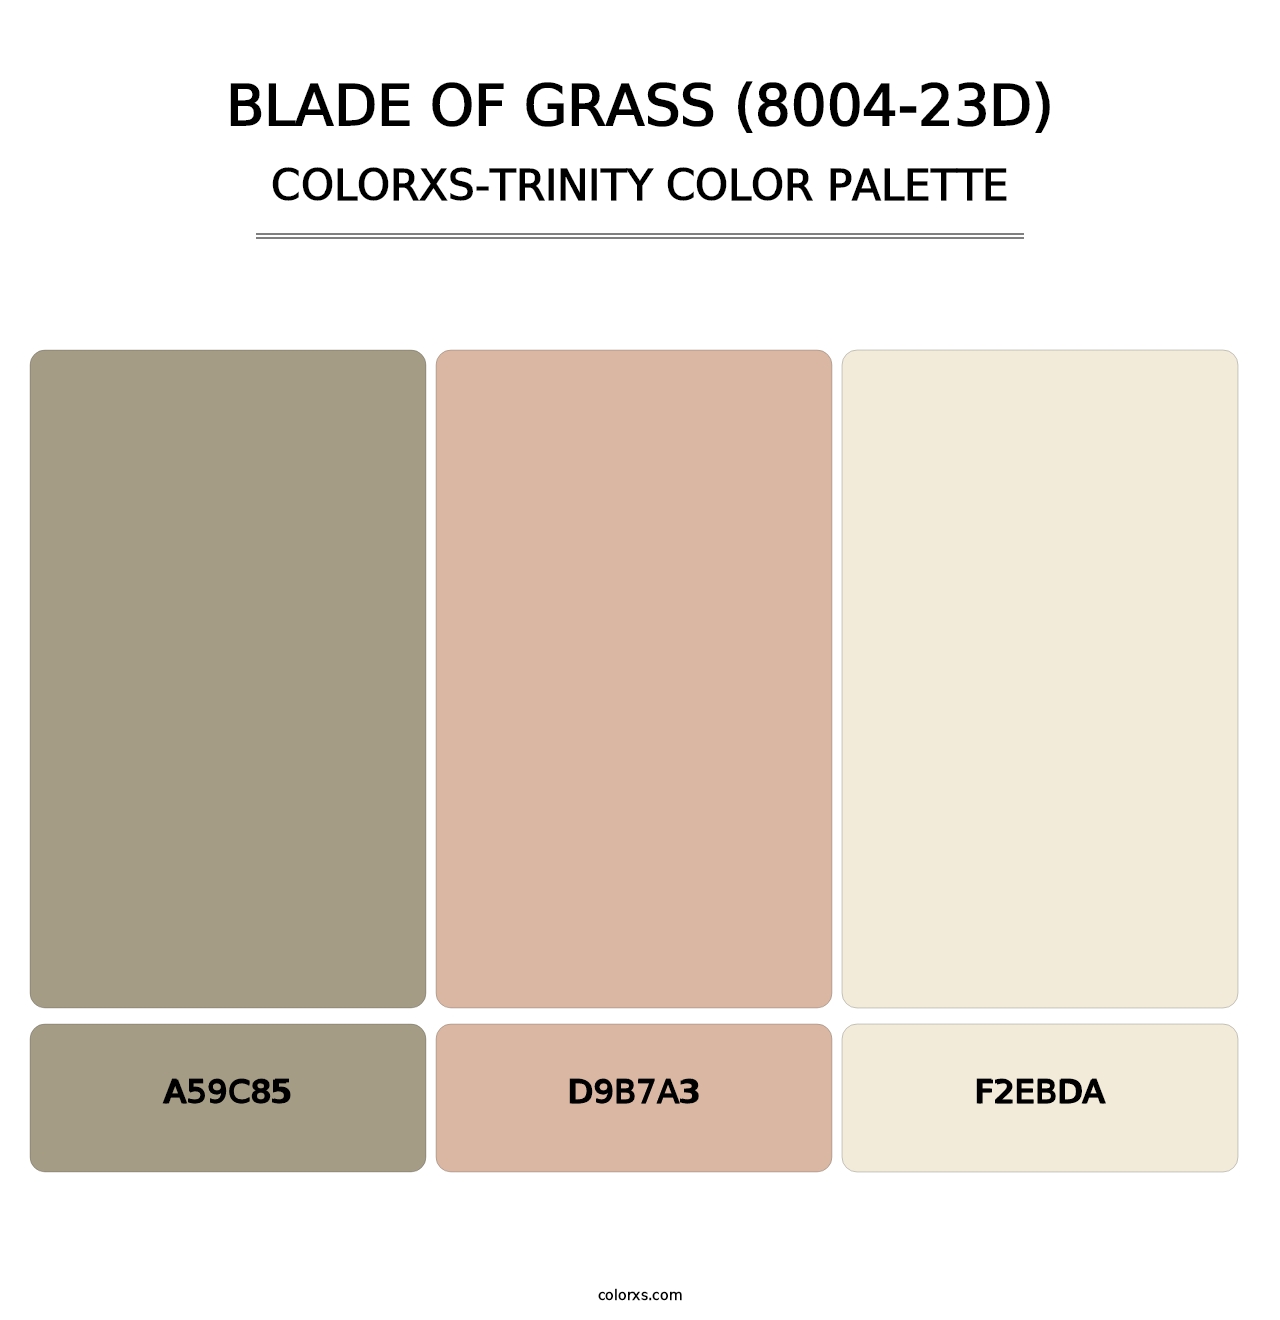 Blade of Grass (8004-23D) - Colorxs Trinity Palette